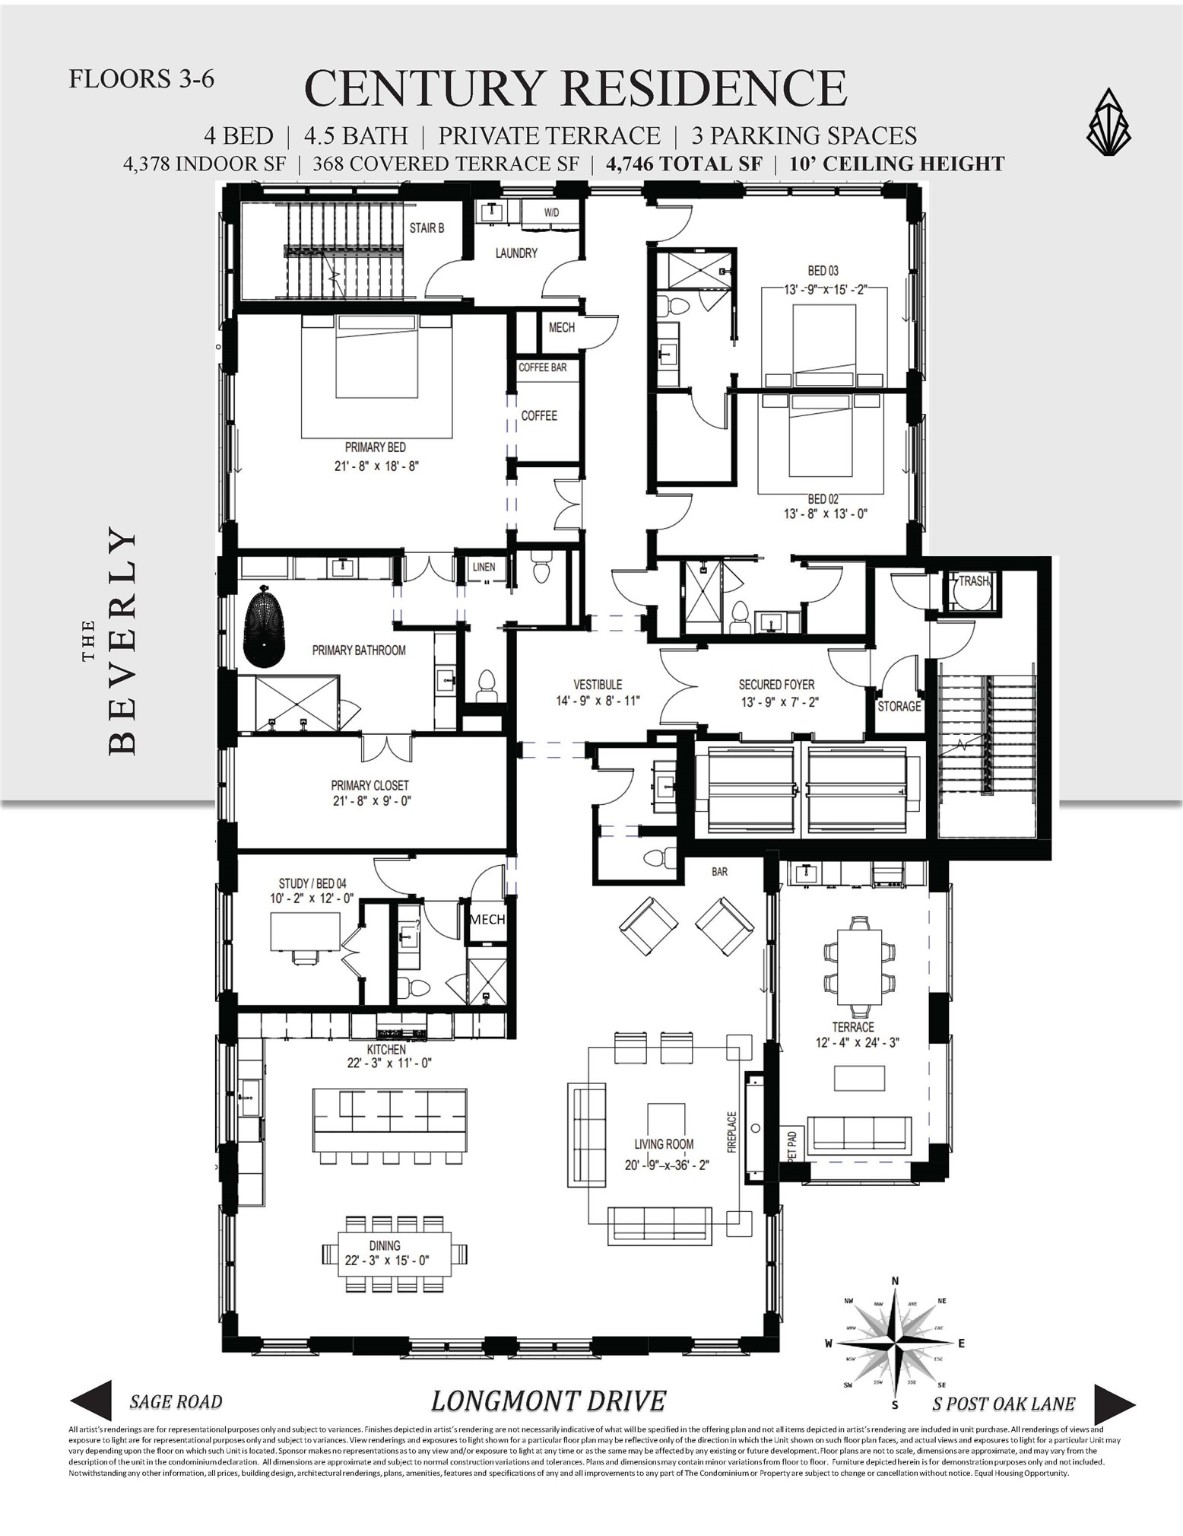 The Century Floorplan - Consisting of 4 bedrooms, 4.5 baths on one single level completed with 2 private elevators opening directly into secured & private resident corridor. Home consists of over 4,300 interior square feet with an additional 370 square feet of covered terrace.